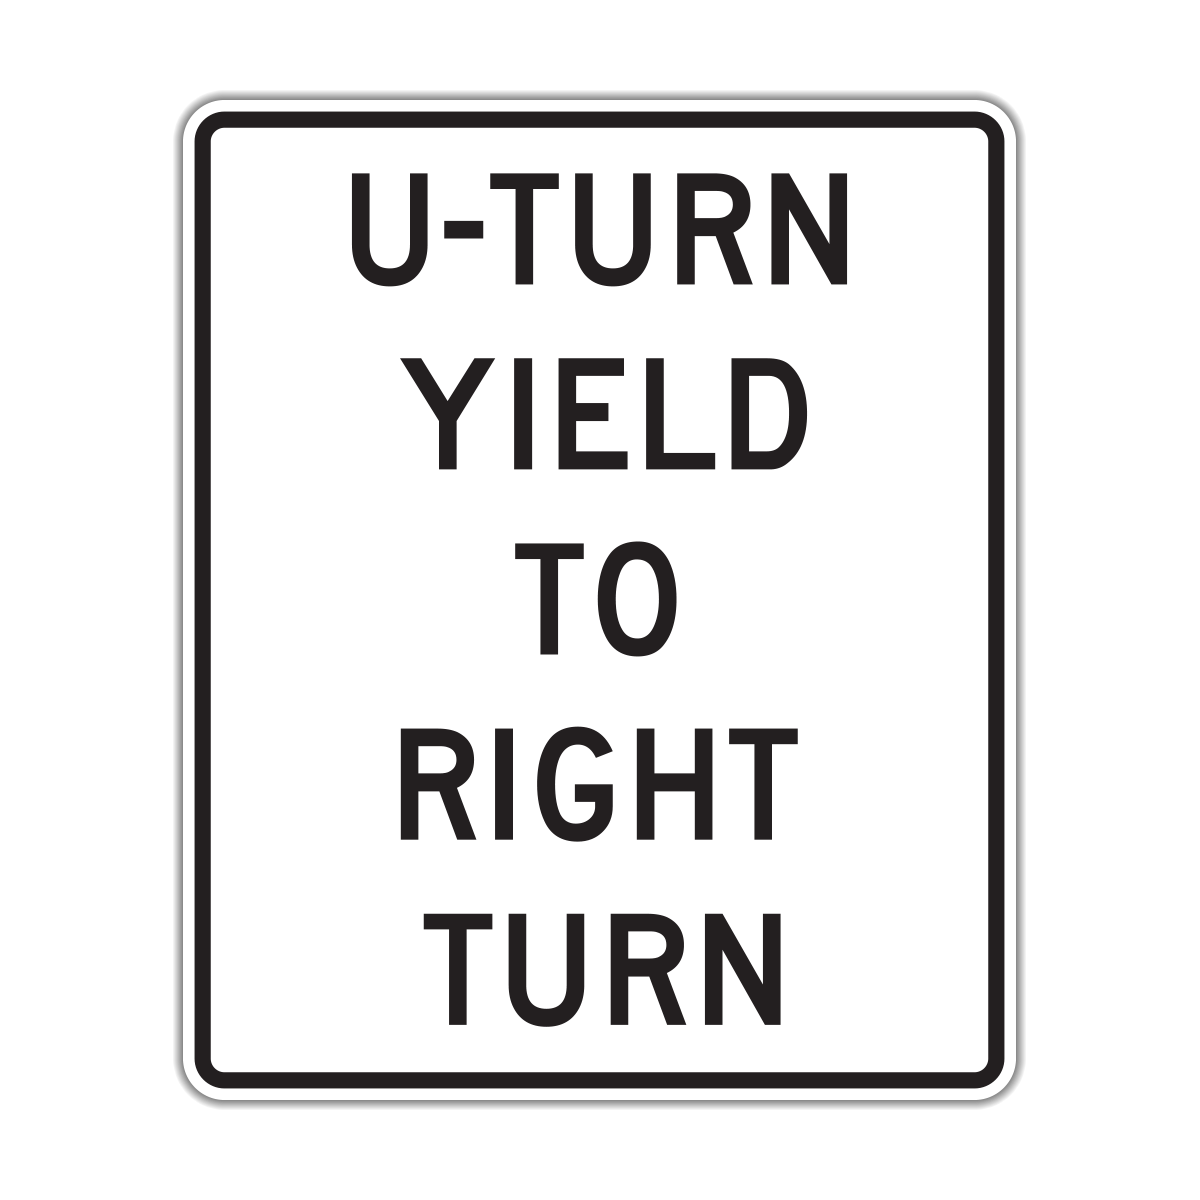 yield sign black and white